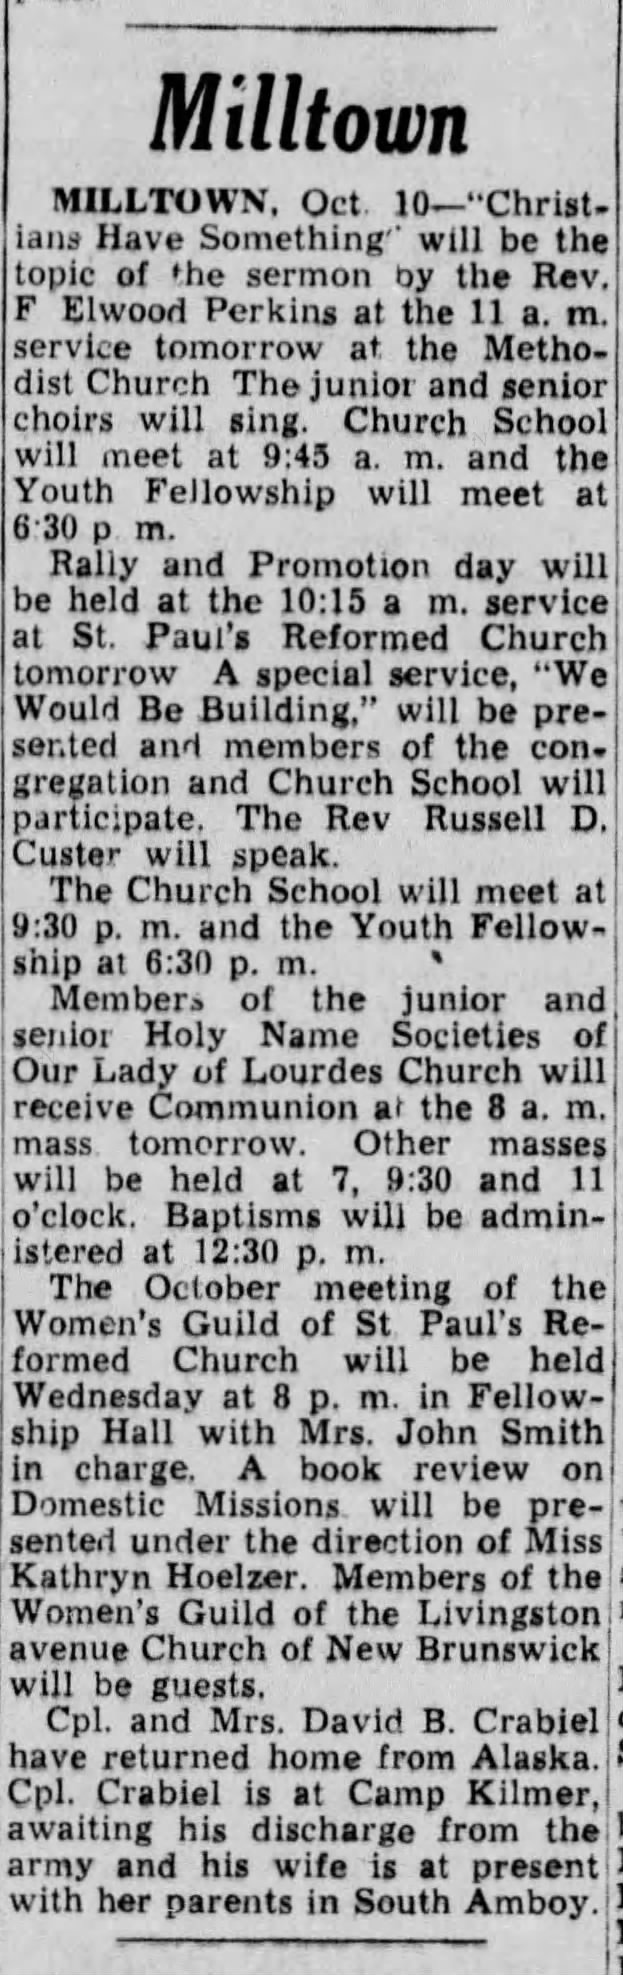 Milltown, The Central New Jersey Home News (New Brunswick, New Jersey) 10 Oct 1953, page 2